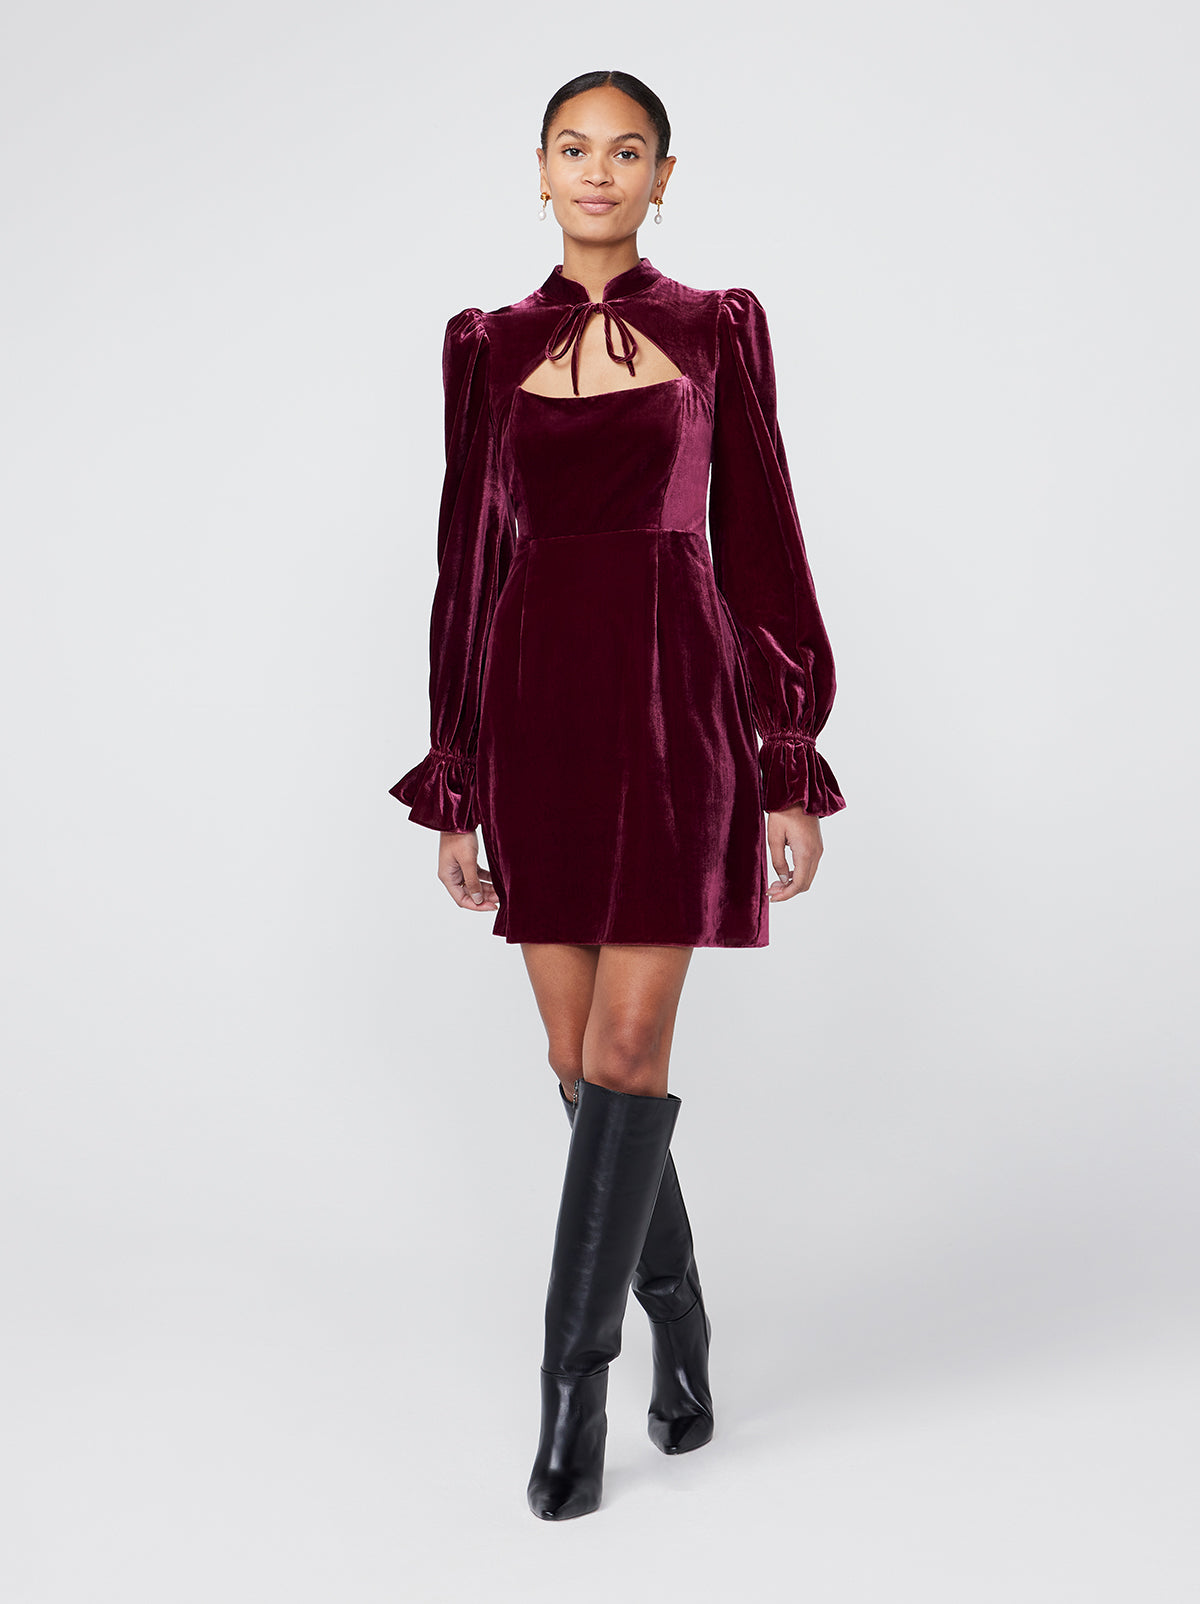 Valentina Burgundy Velvet Mini Dress By KITRI Studio is a sultry sleeved mini dress with a tie detail collar. An ideal party dress option it features puff shoulders and elasticated frilly cuffs - as well as a fitted bodice for a memorable silhouette. Deep dark red velvet fabric looks elegant and expensive.